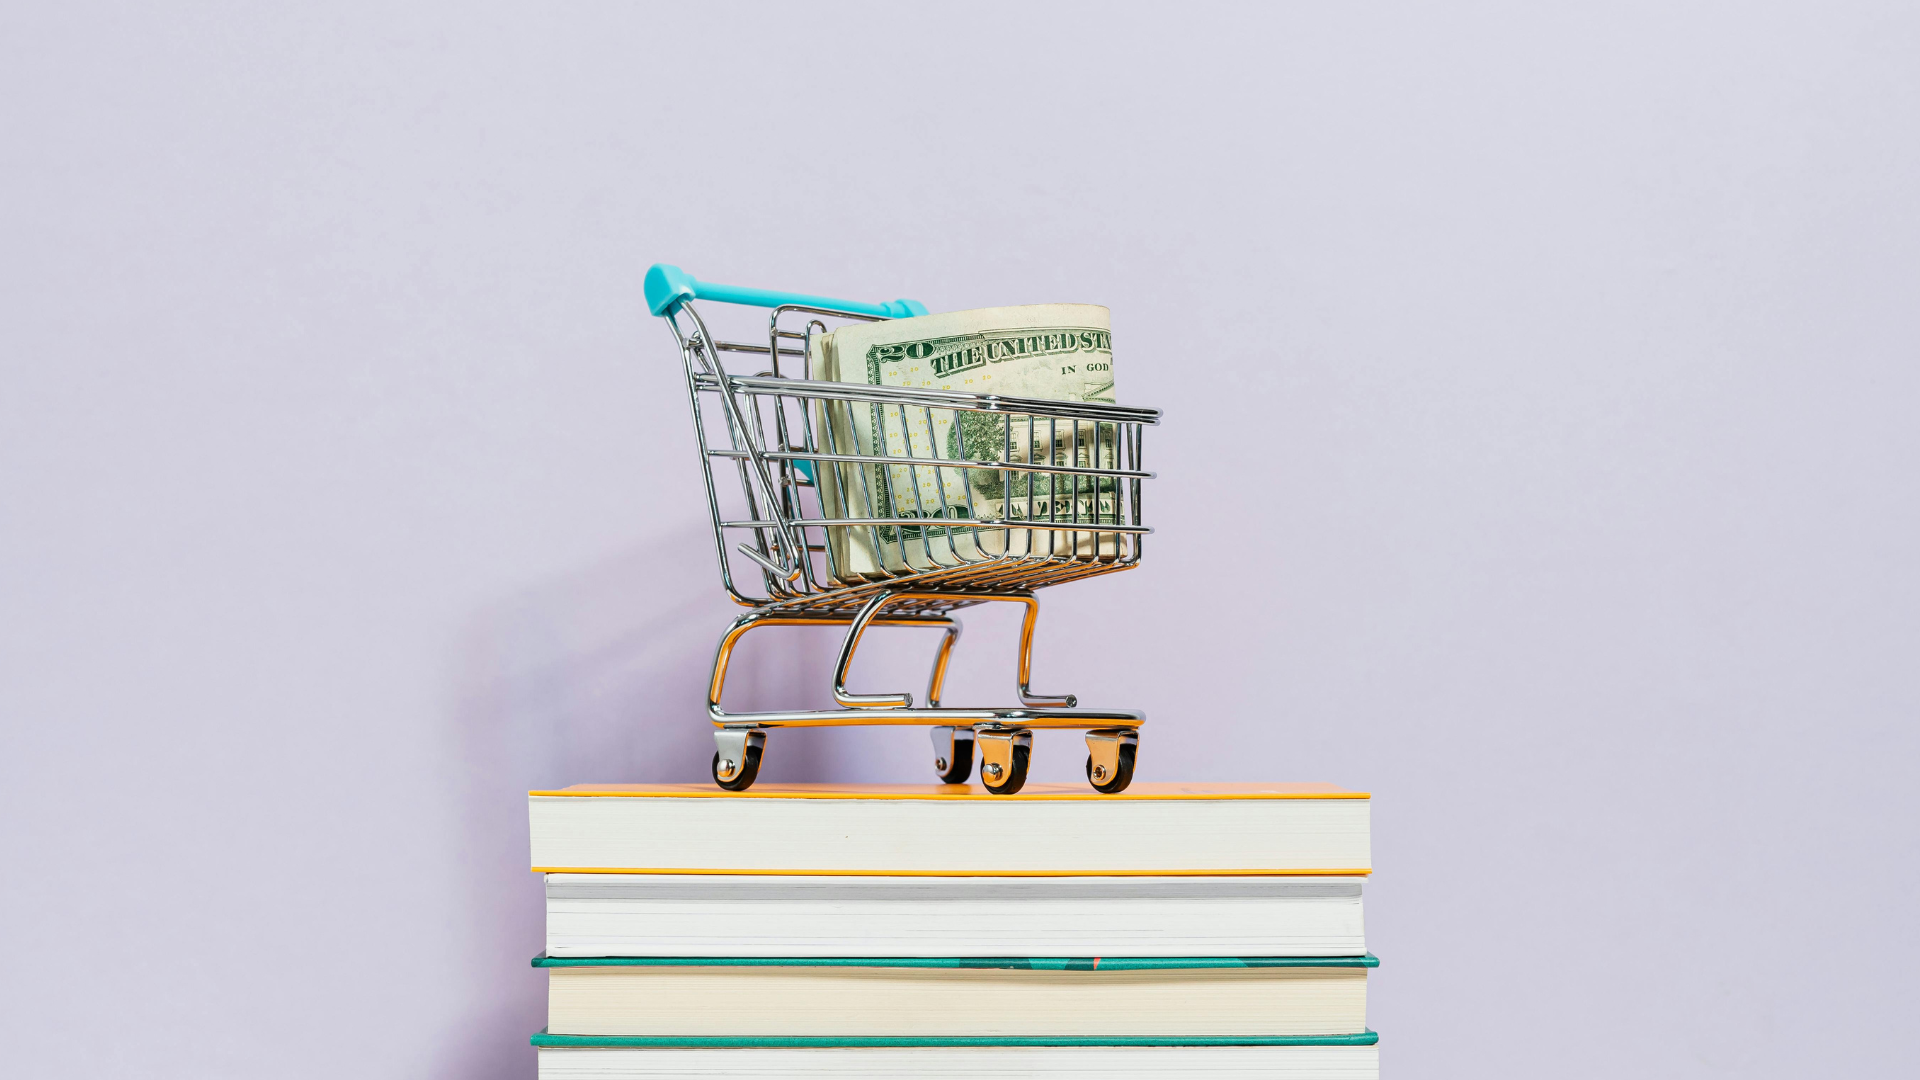 A tiny model grocery cart holds cash in its basket, suggesting that it is grocery money, which is what programs like SNAP provide.